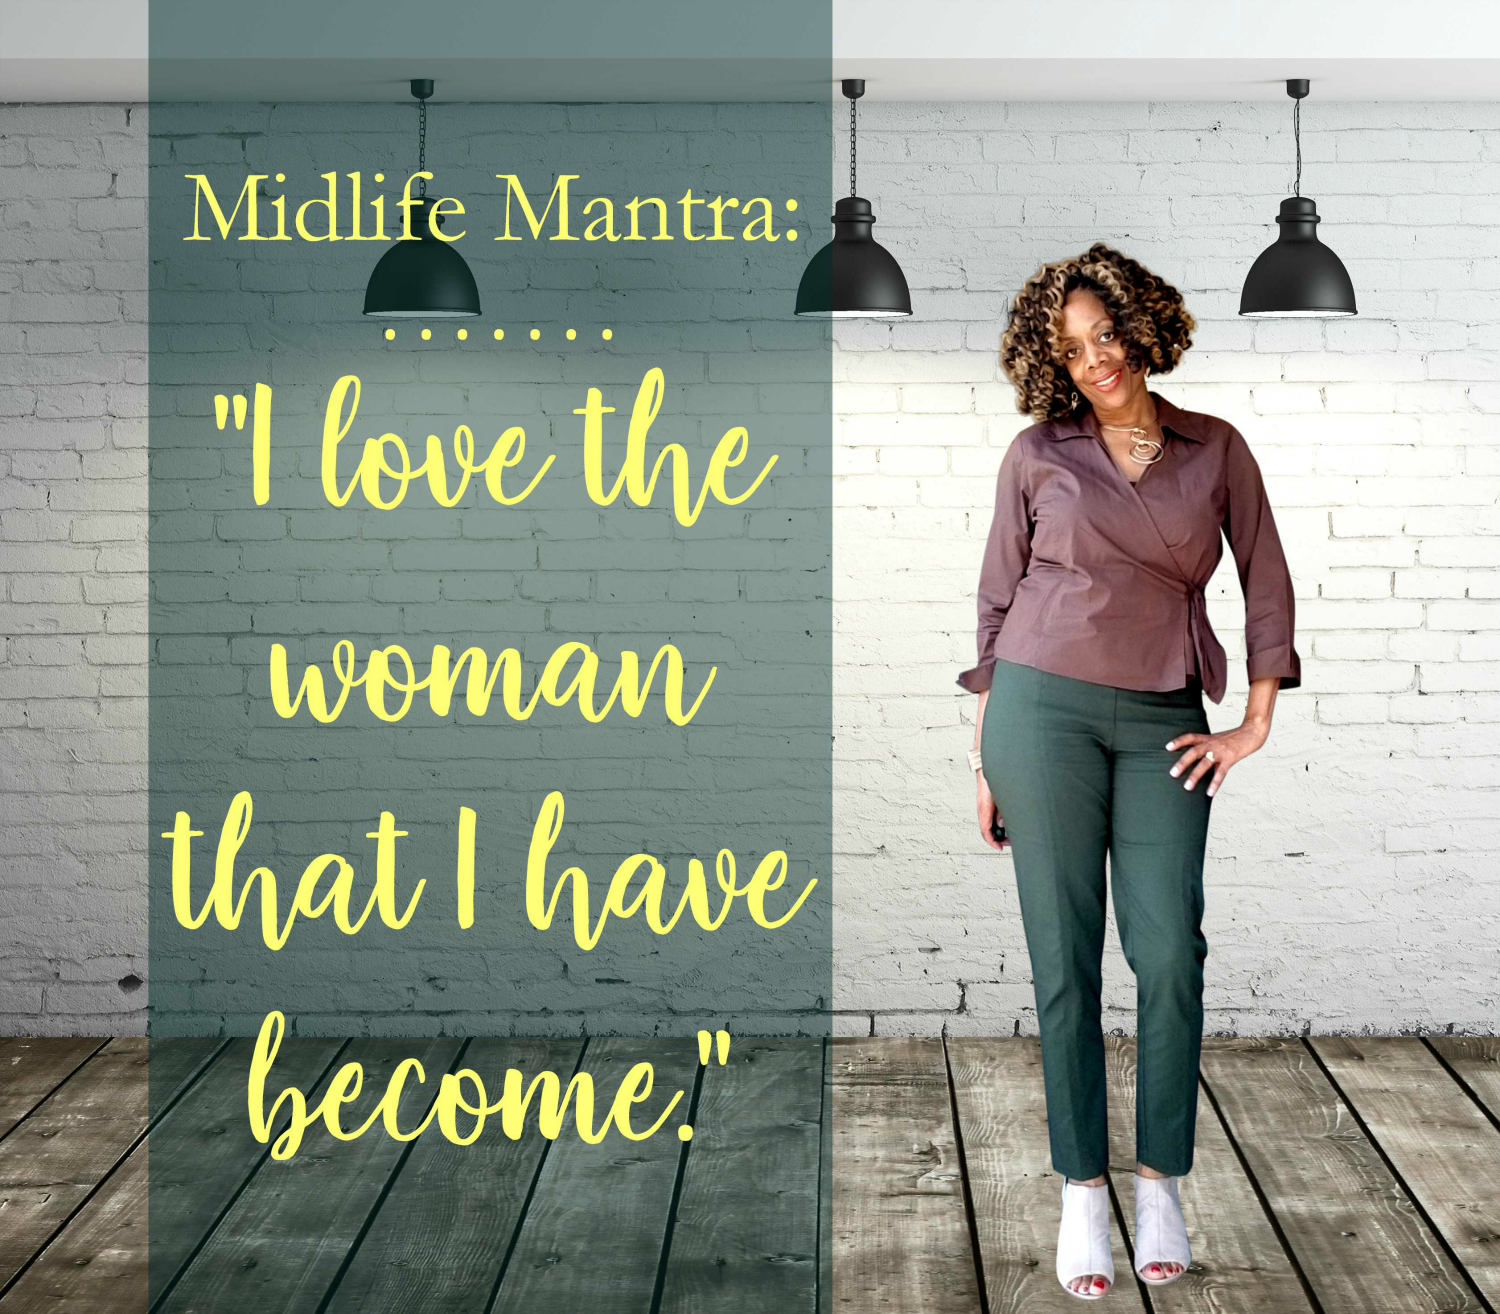 Midlife Mantra: I Love The Woman That I Have Become